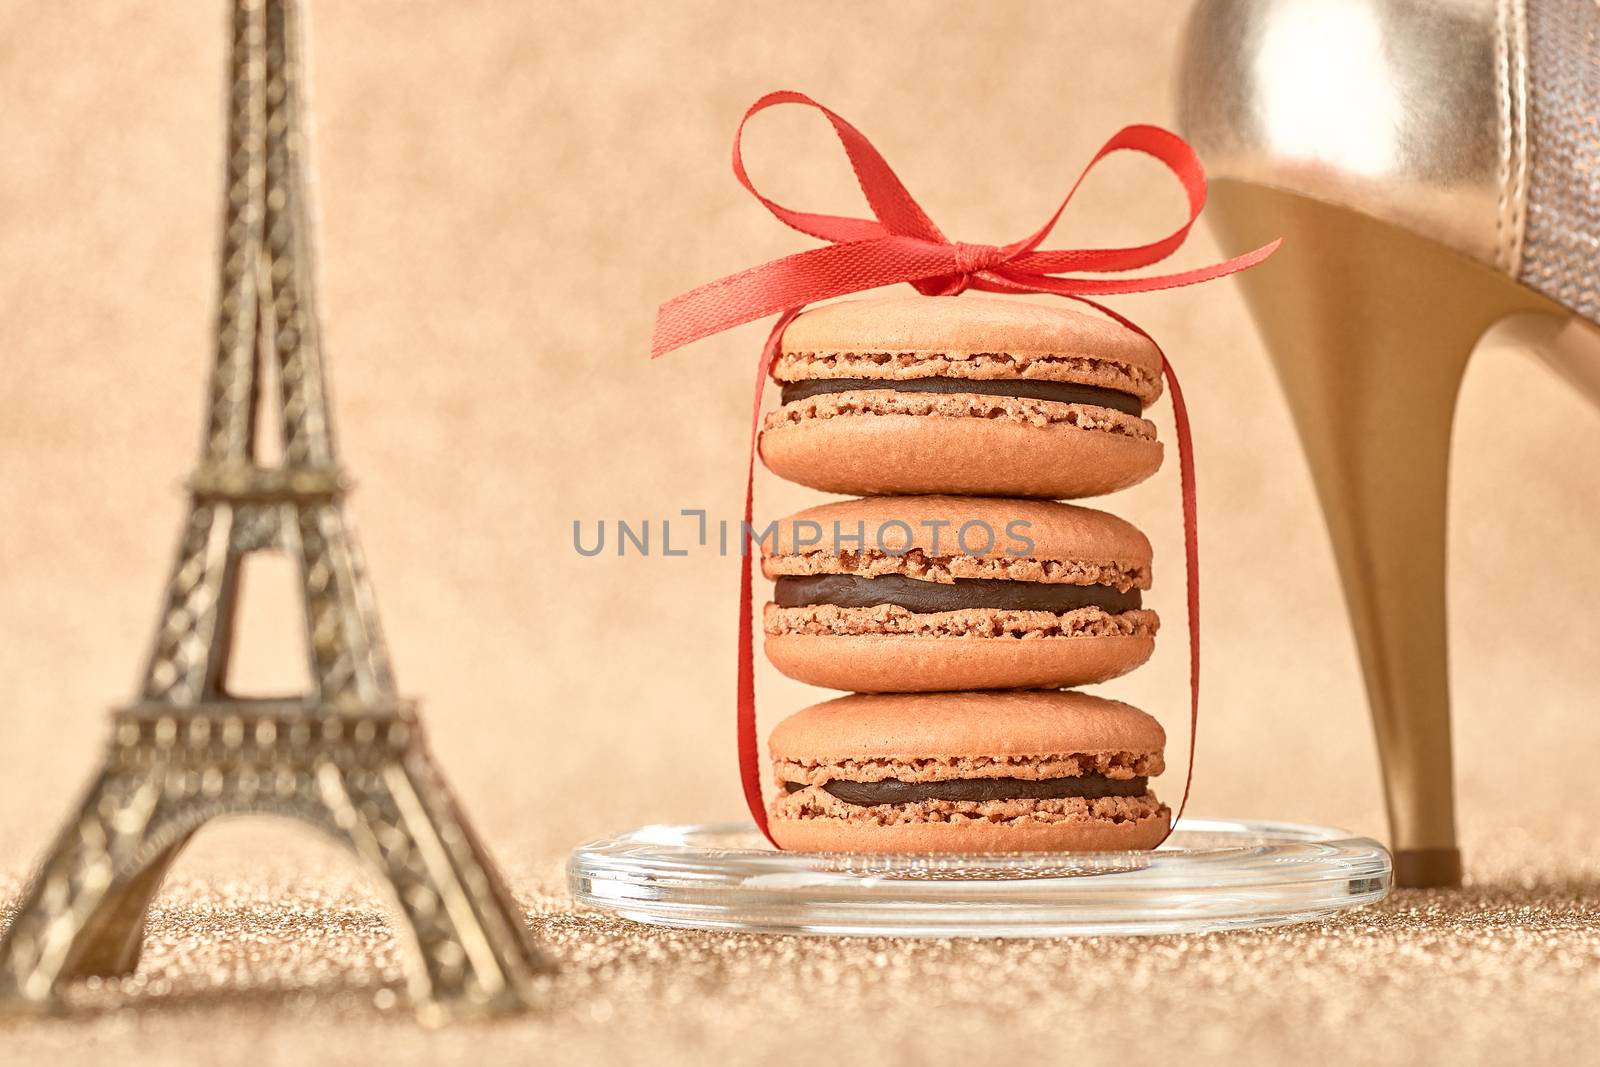 Macarons french dessert. Still life. Luxury shiny shoes high heels, Eiffel Tower, souvenir from Paris, red ribbon. Vintage retro romantic. Unusual creative art greeting card, gold background, bokeh